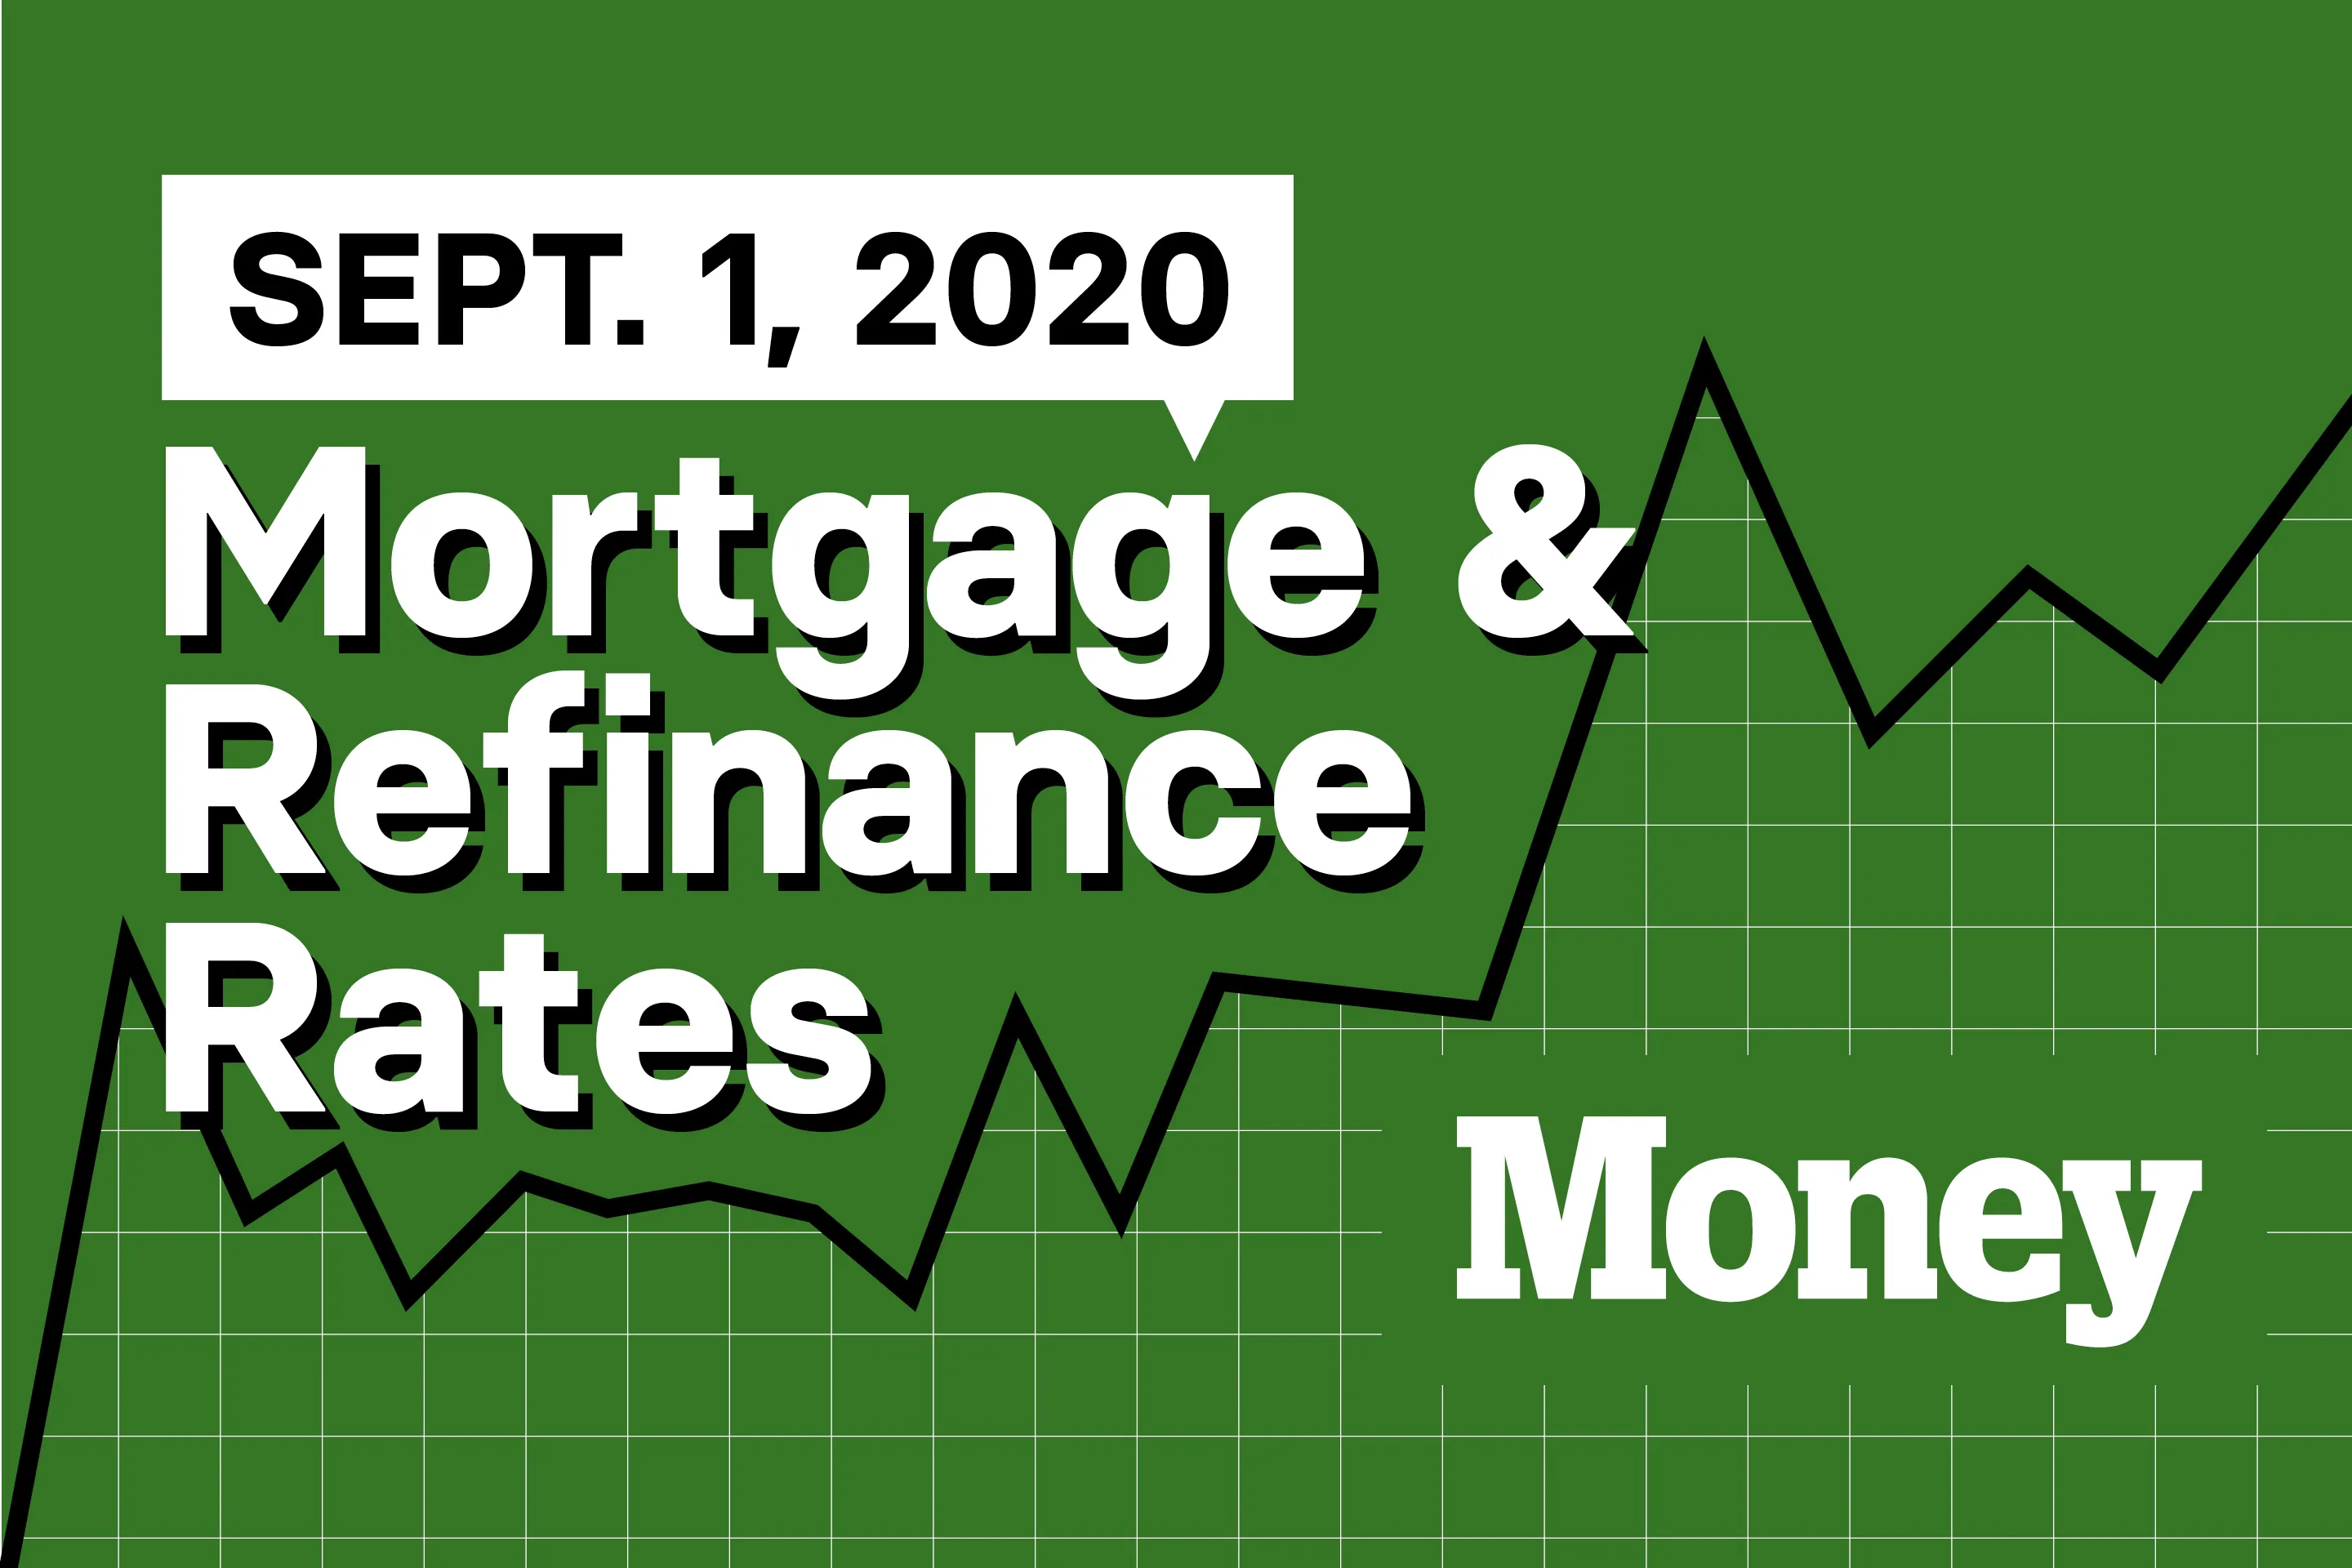 Here Are Today's Best Mortgage & Refinance Rates for September 1, 2020